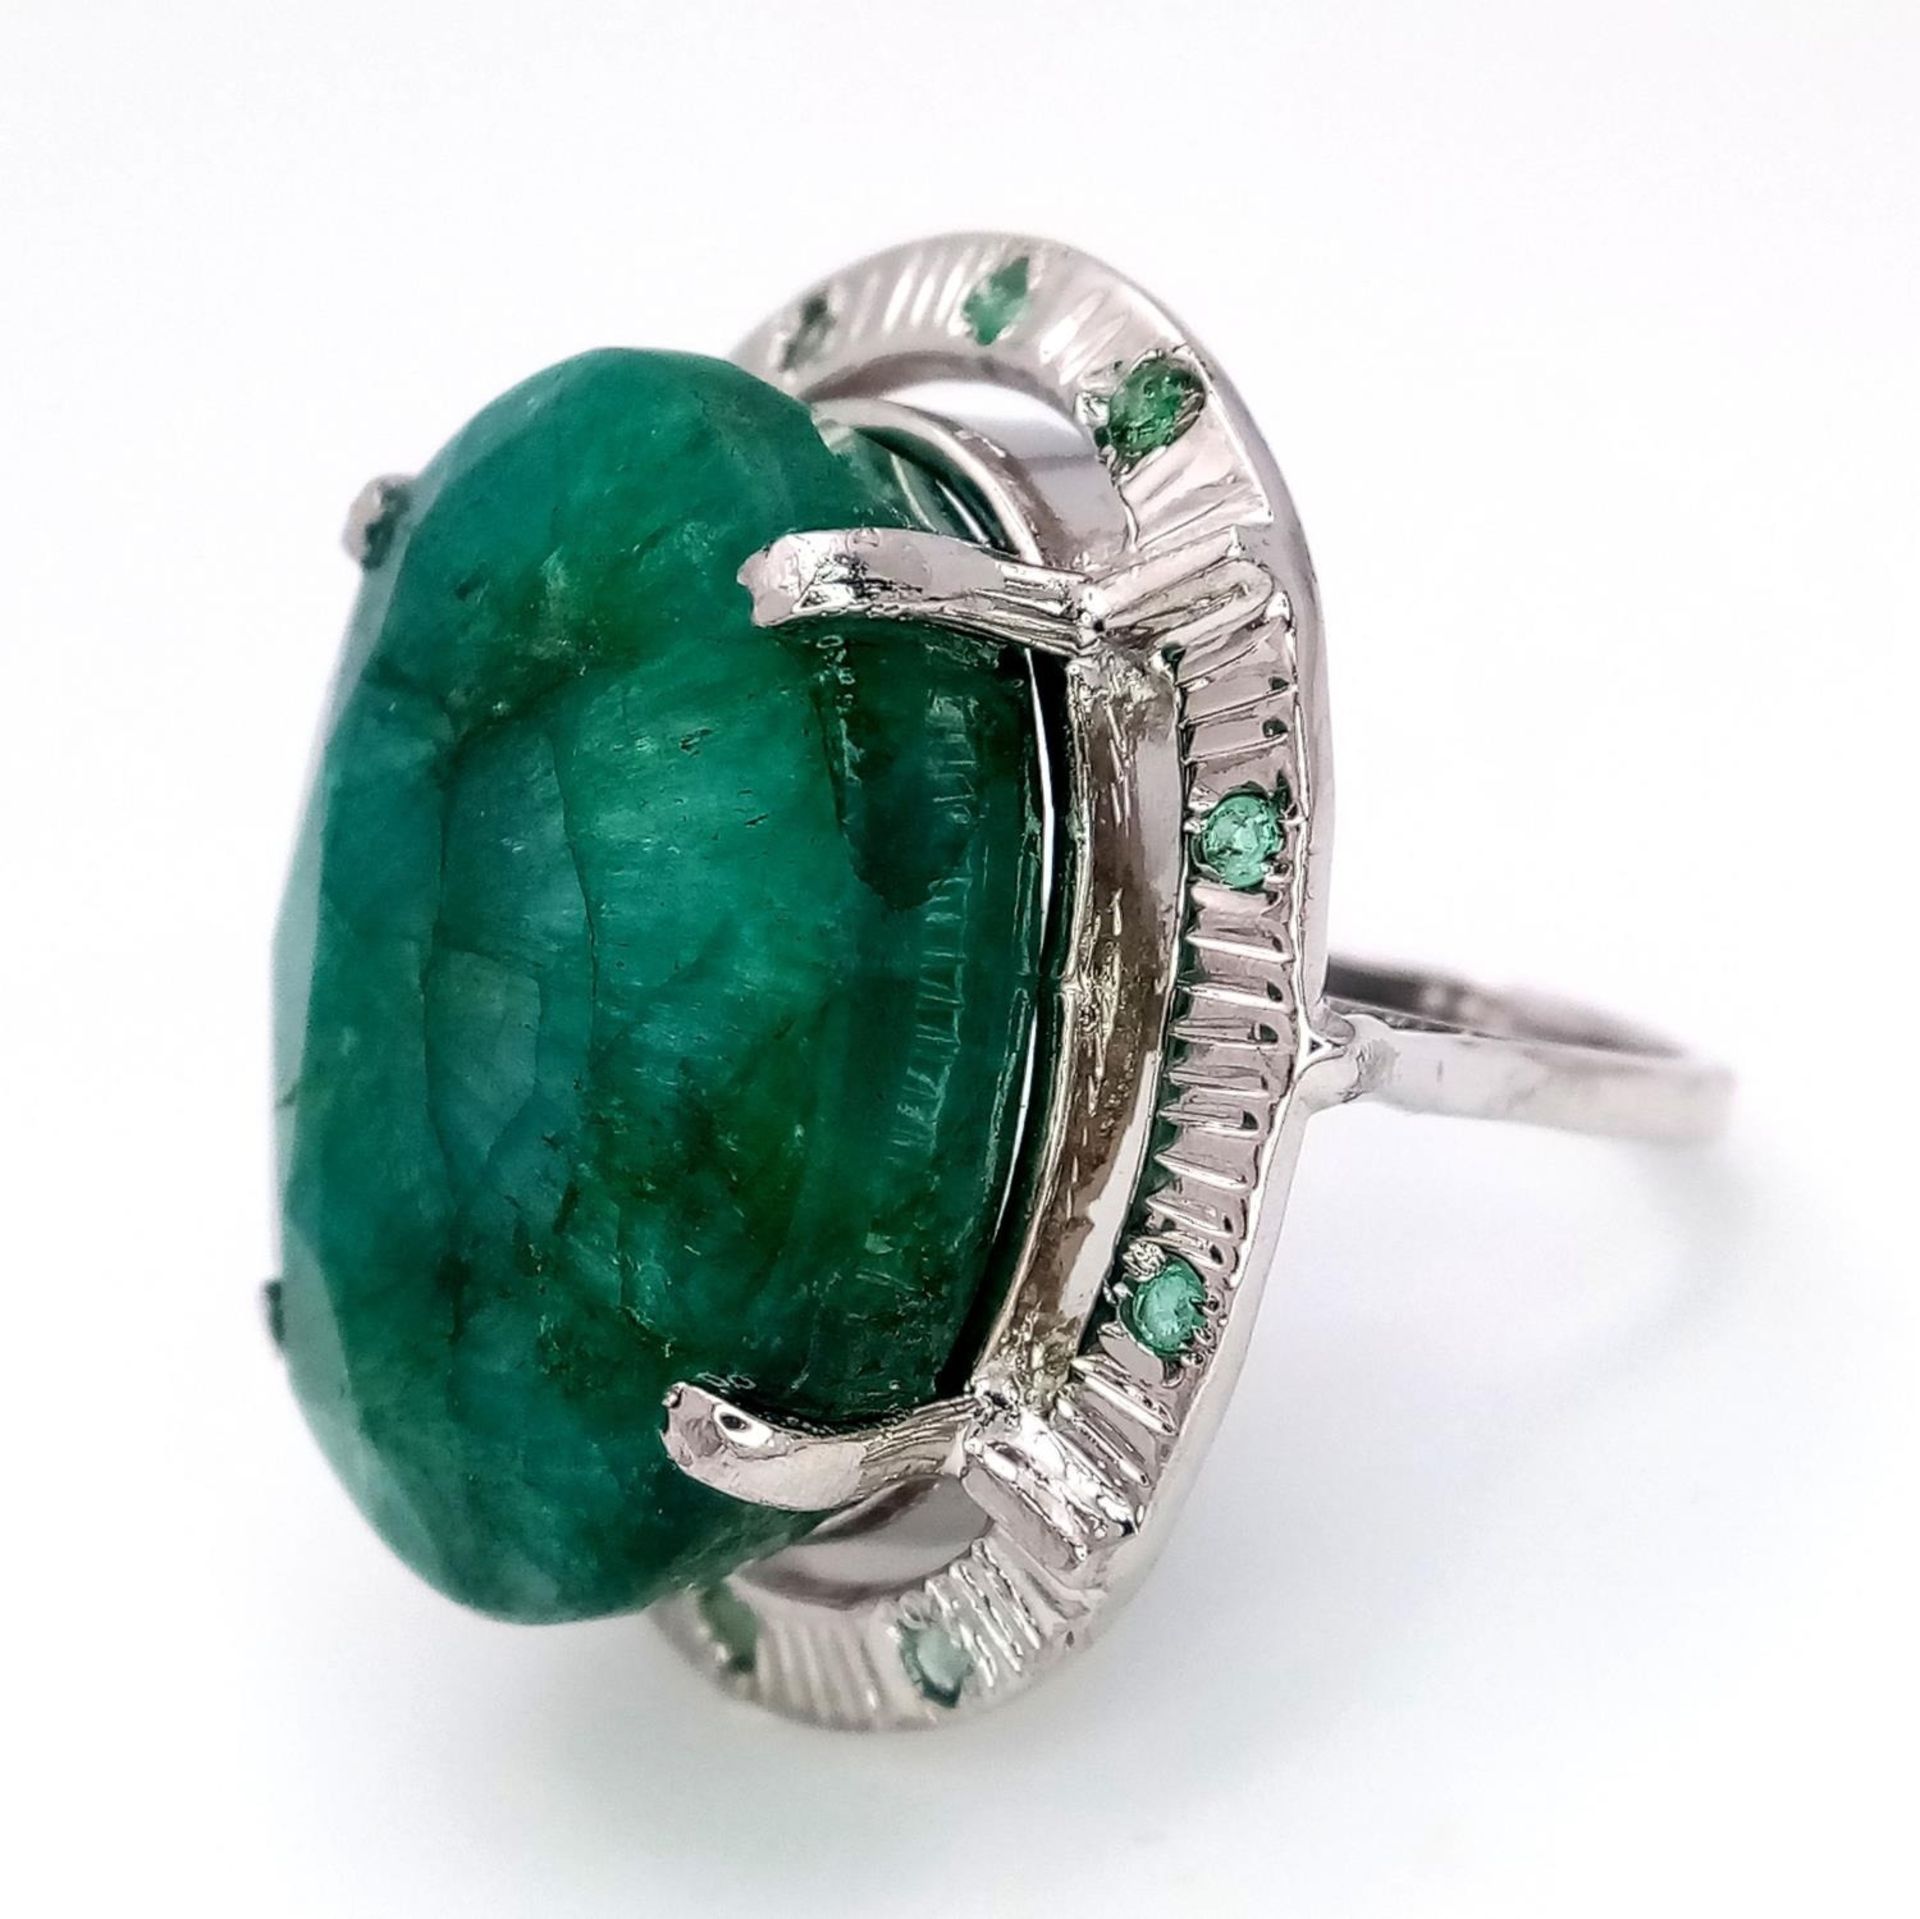 A 48ct Brazilian Emerald Silver Ring. Set in 925 Sterling Silver. W- 17.5g. Comes in a - Image 3 of 6